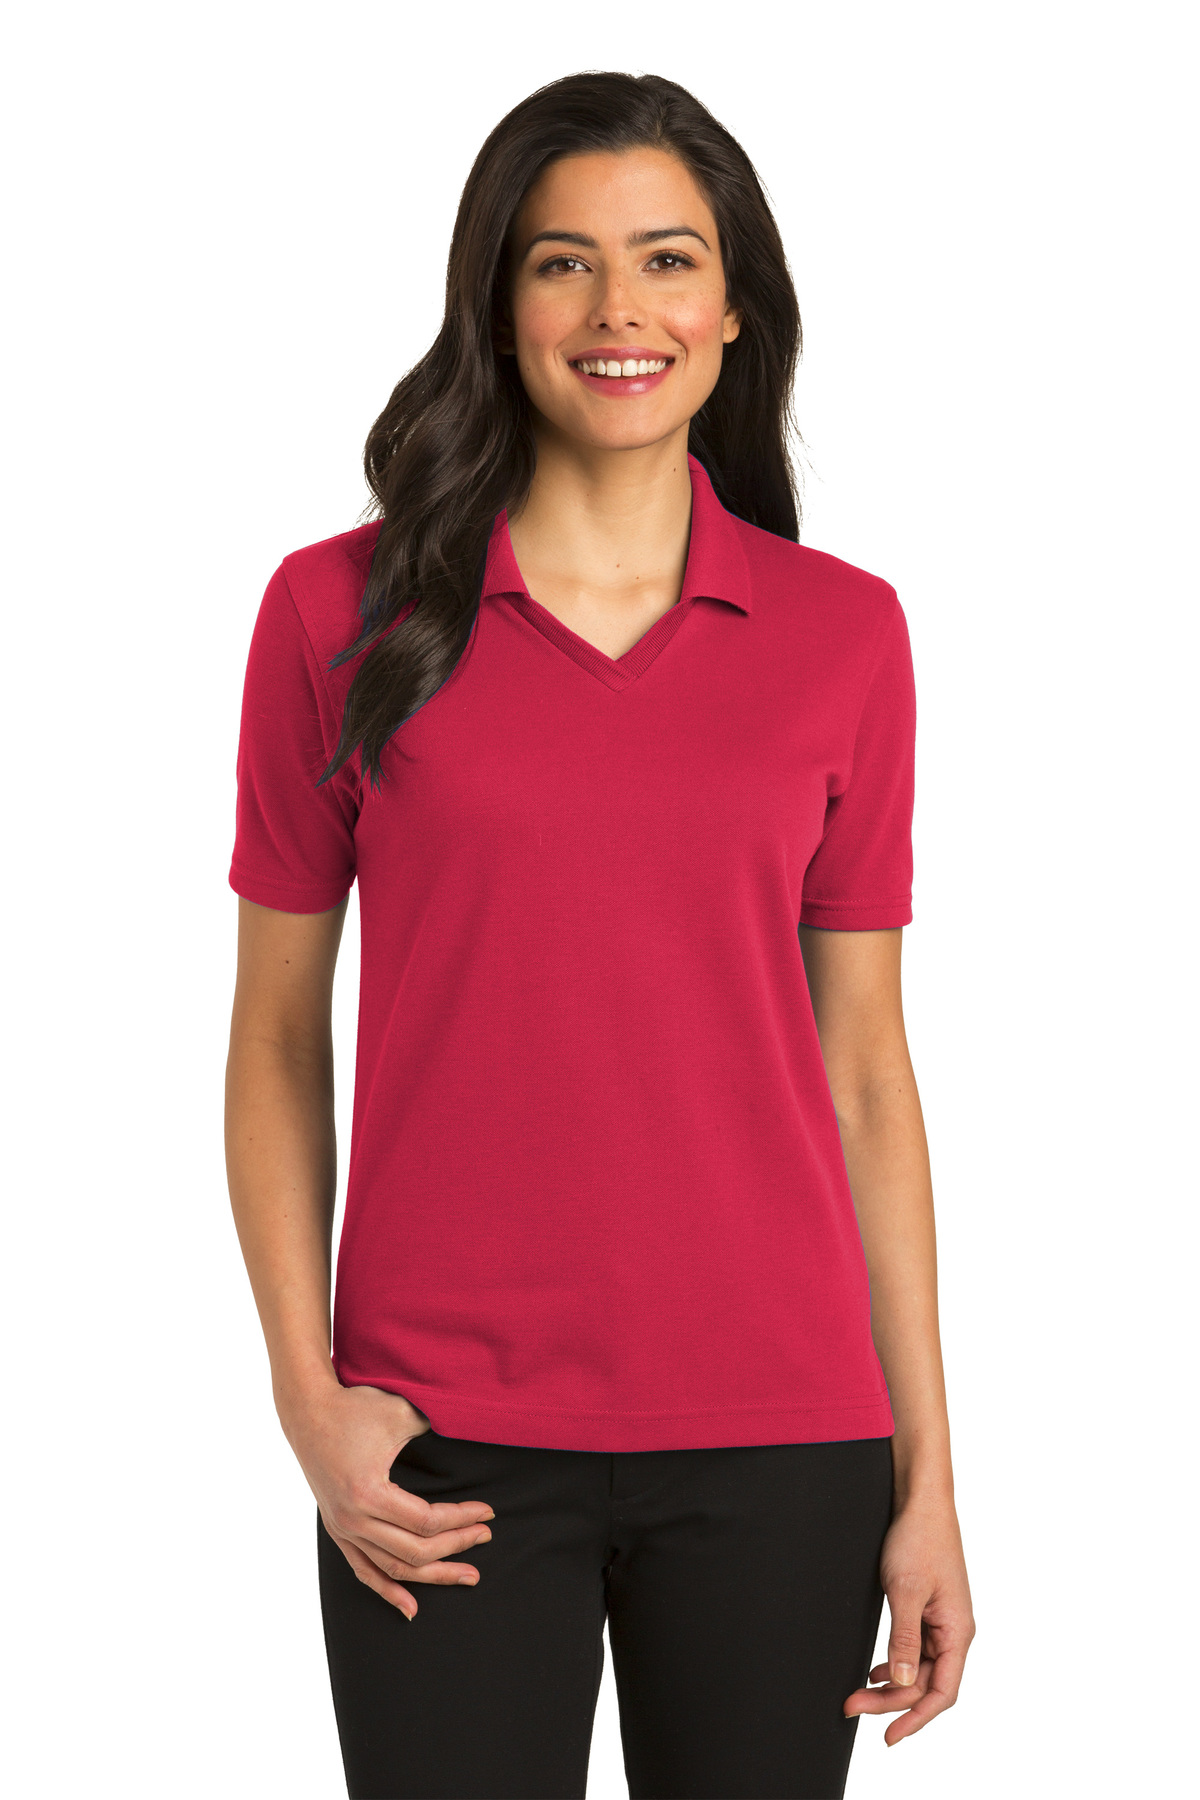 Port Authority Ladies Rapid Dry Tipped PoloL Red/Jet Black L454 